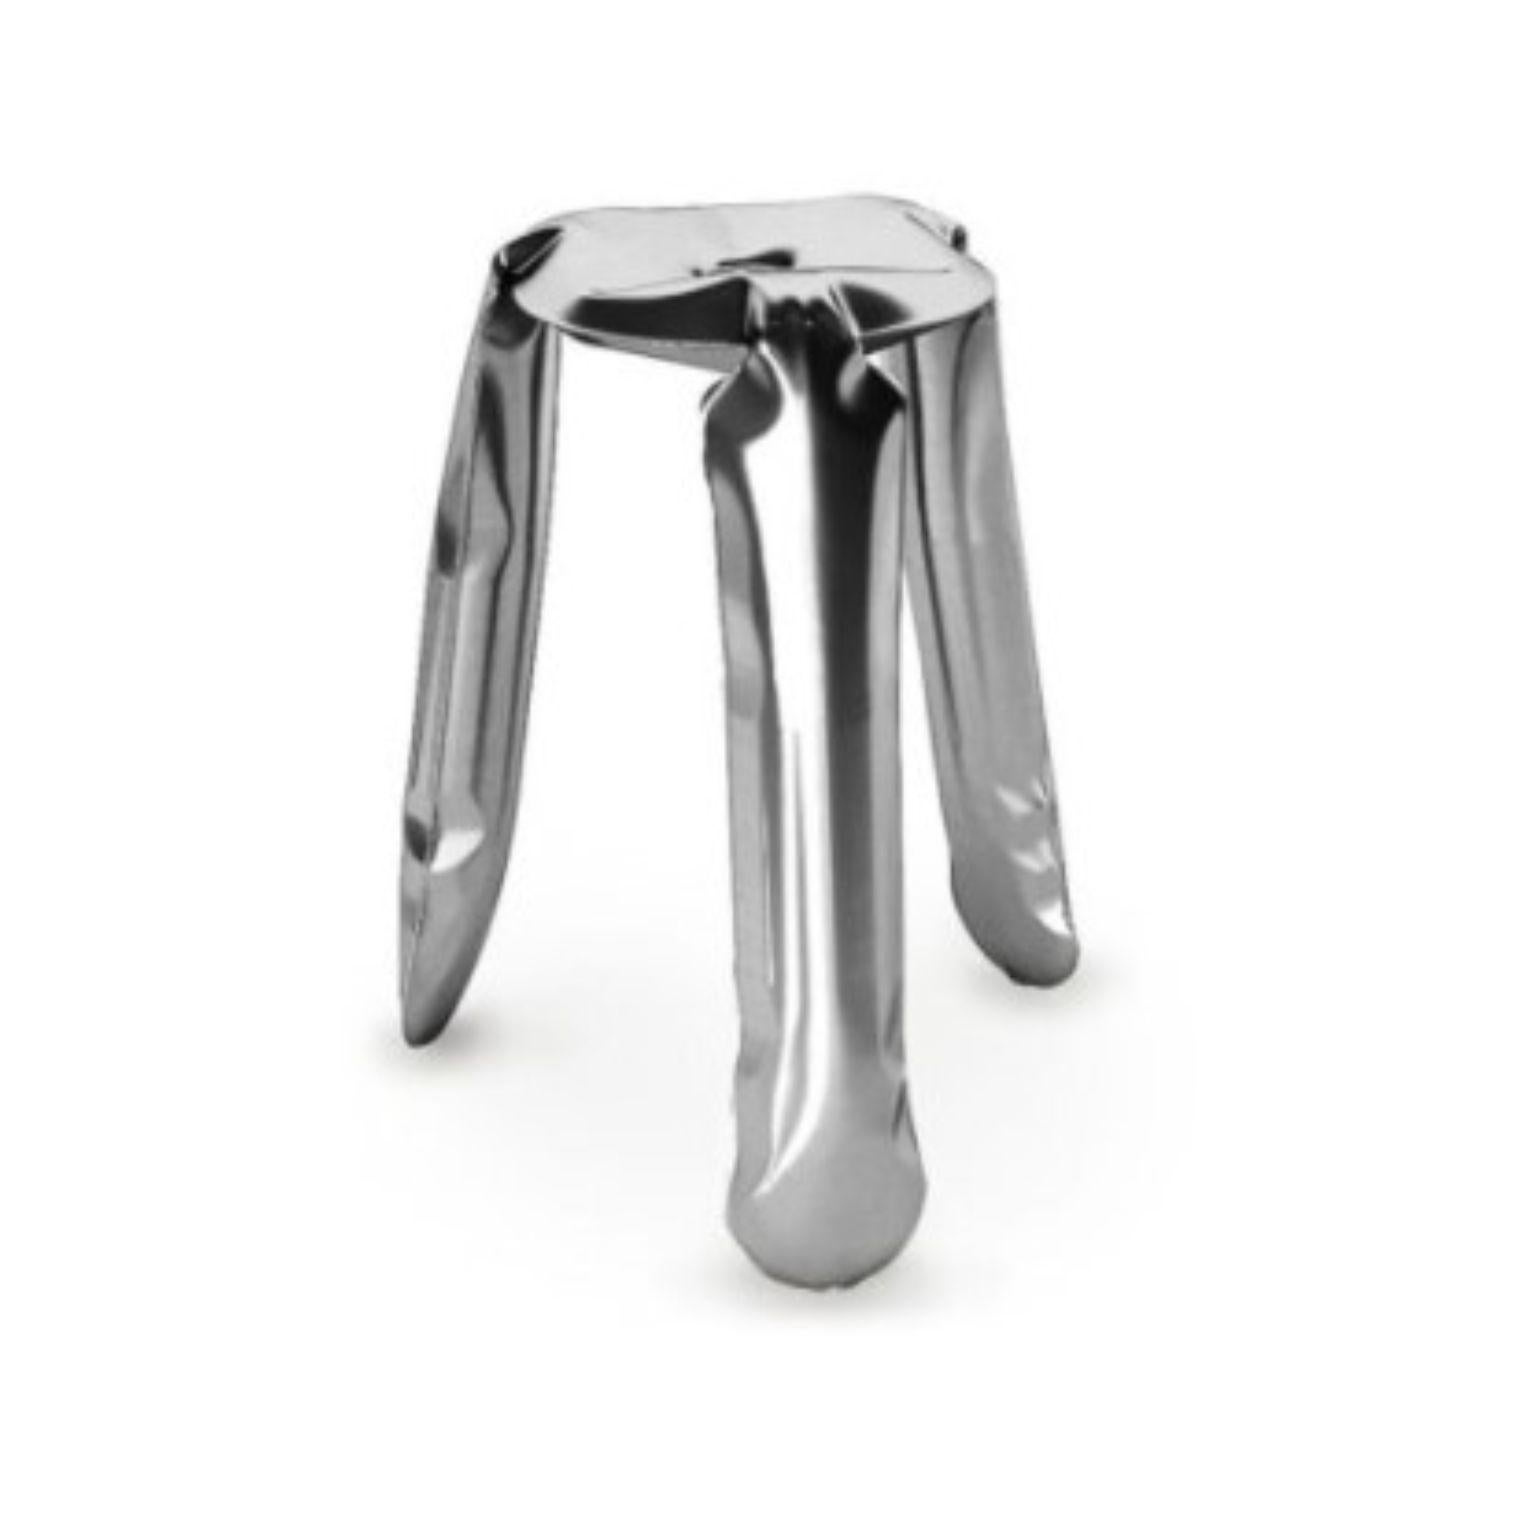 Stainless Steel Kitchen Plopp stool by Zieta
Dimensions: D 35 x H 65 cm 
Material: Stainless Steel.
Finish: Polished.
Available in colors: Beige, black, blue, graphite, moss, umbra gray, and flamed gold. Available in Stainless Steel, Aluminum,